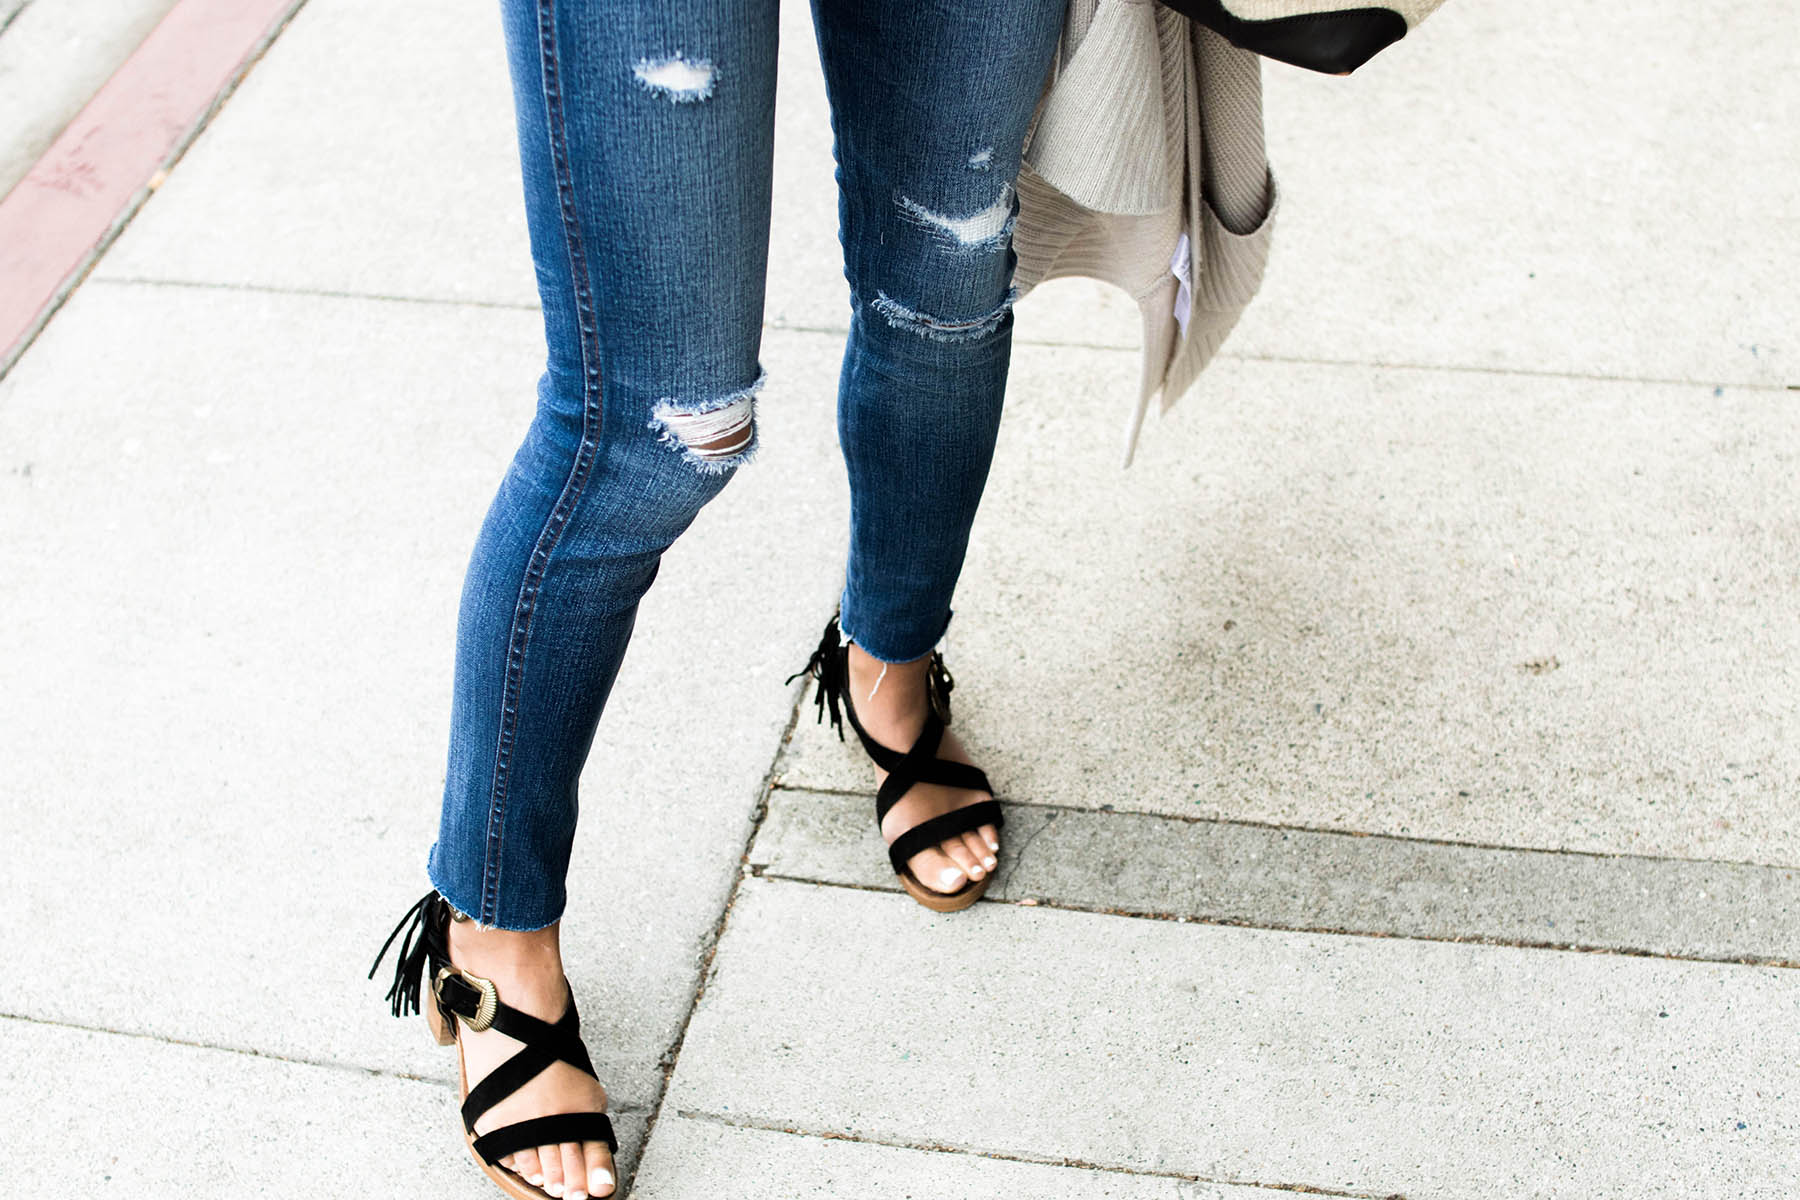 madewell distressed skinny jeans and matisse sandals